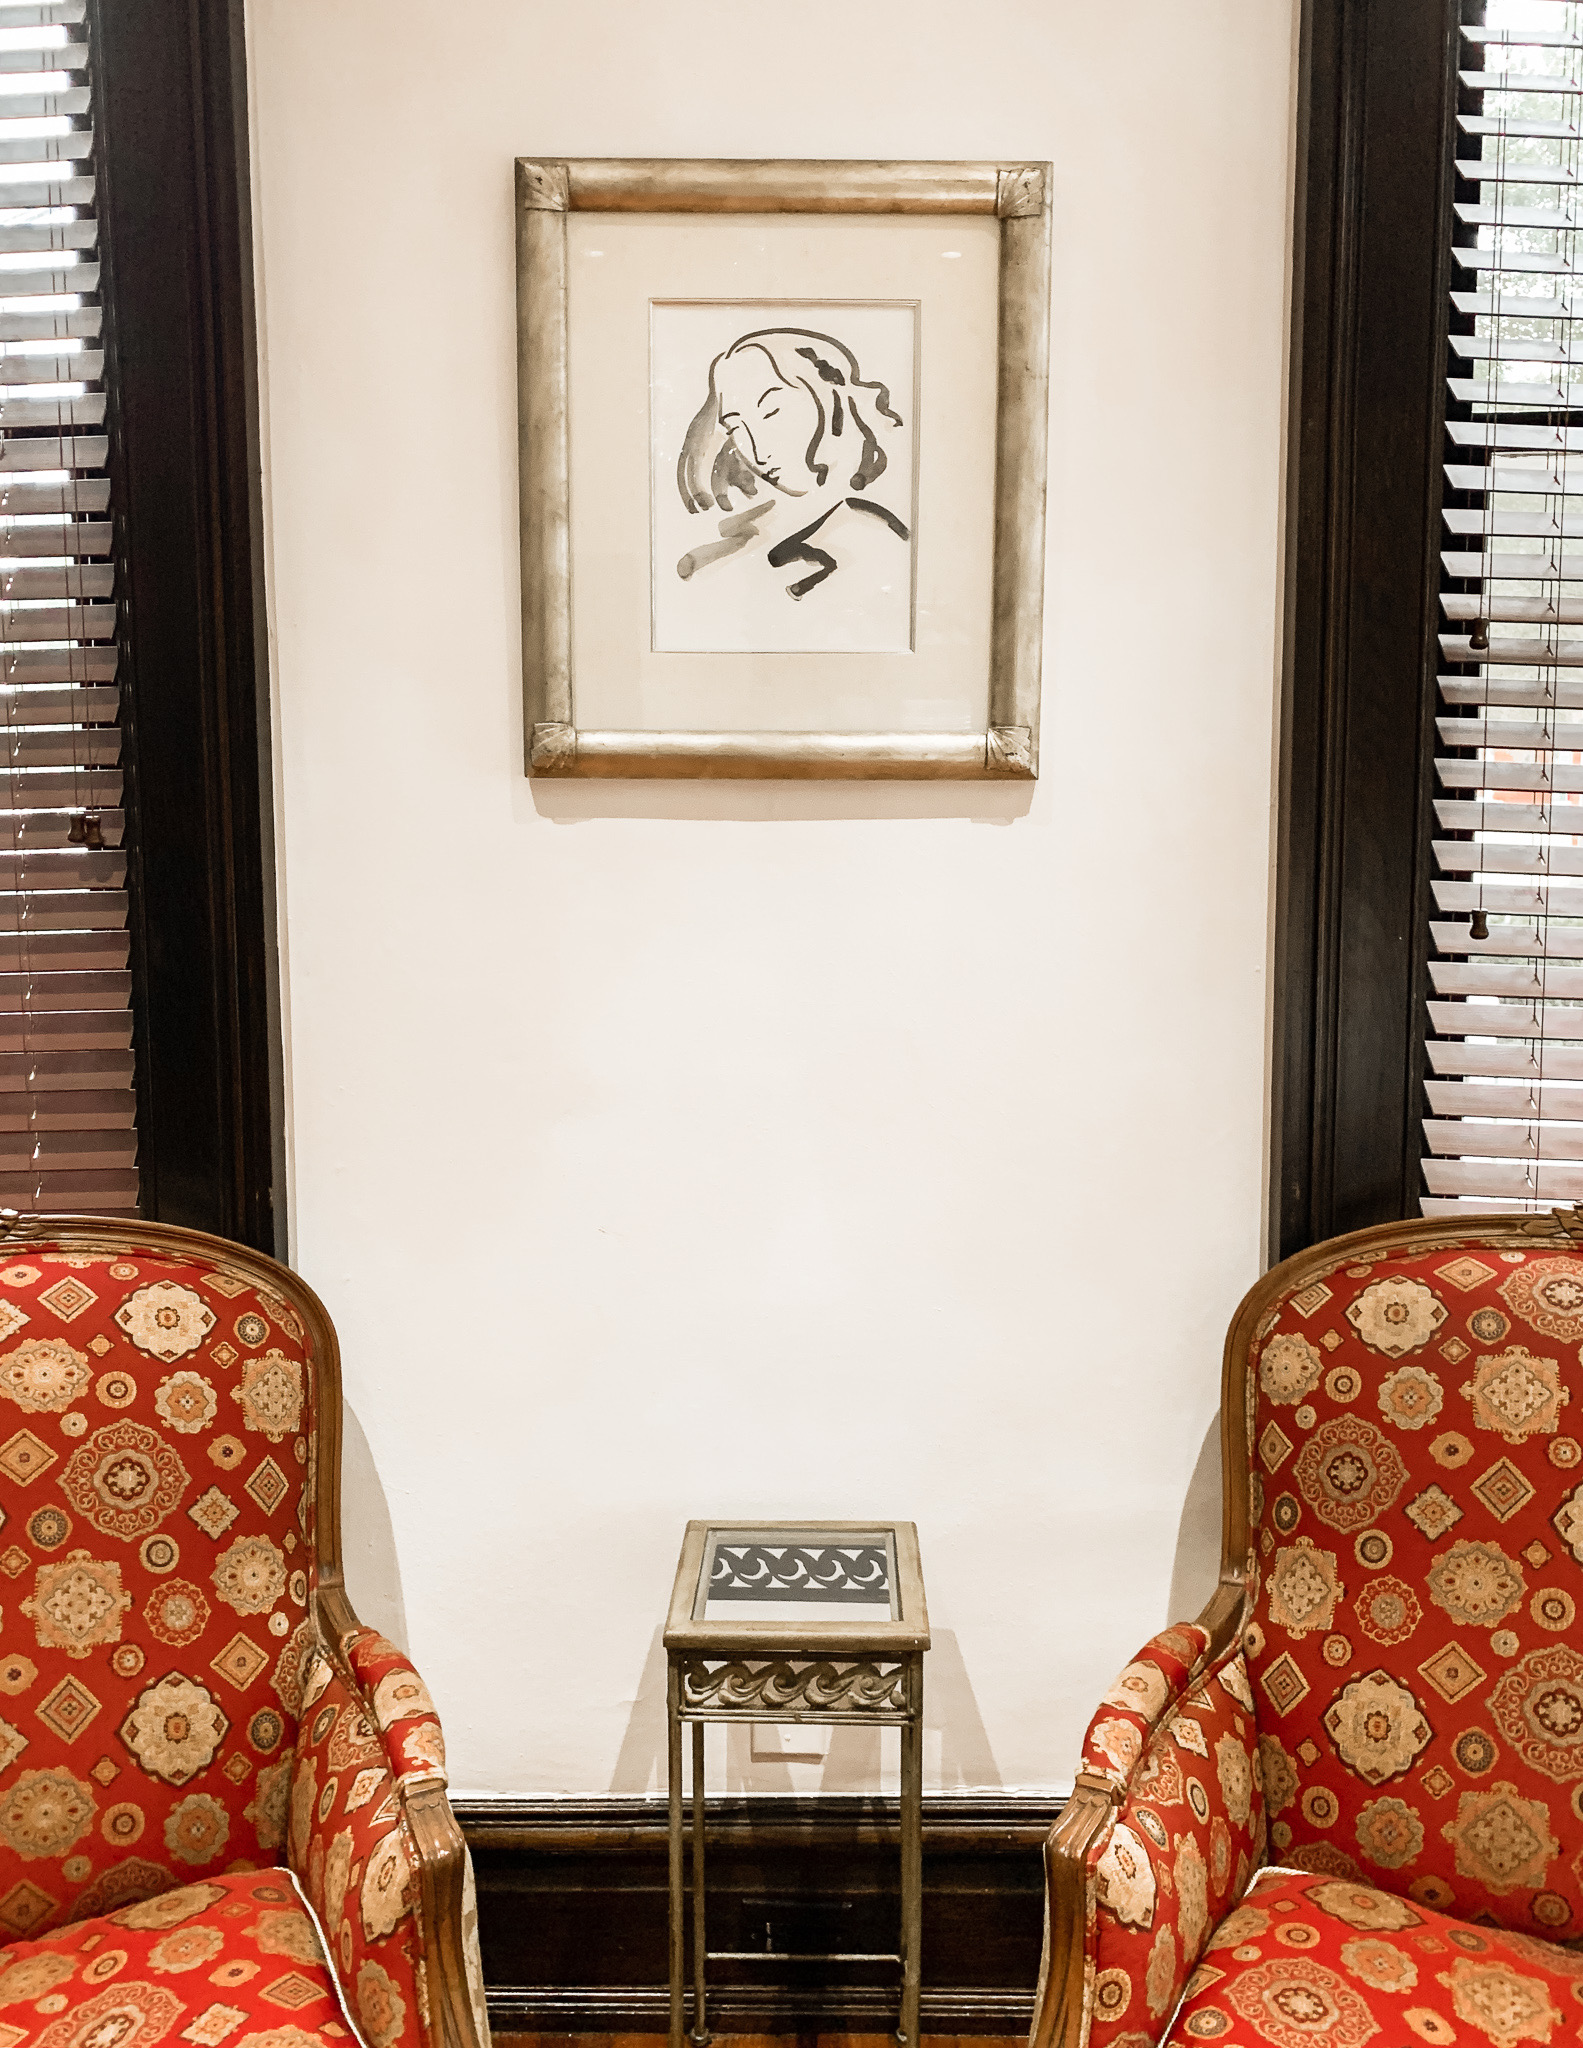 Wall art and two patterned chairs